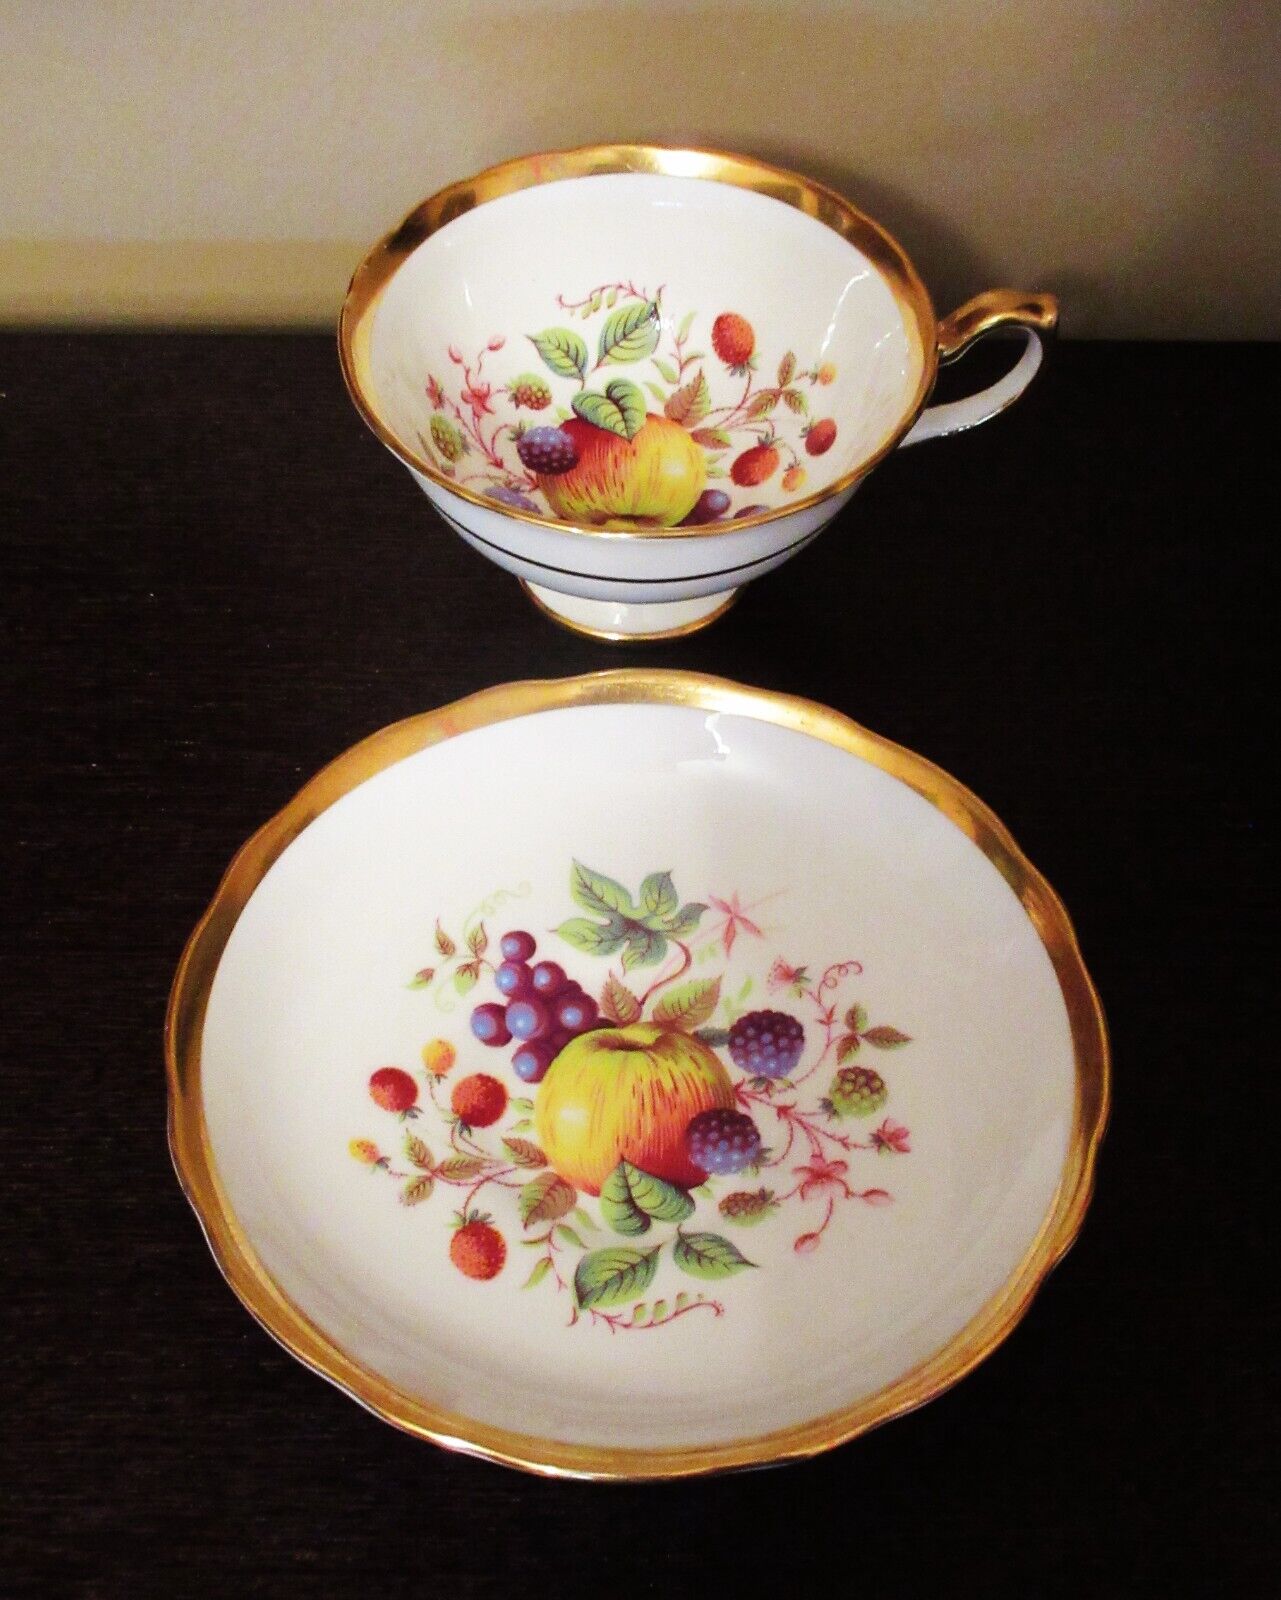 Hammersley English Bone China Tea Cup and Saucer Fruit Accents with Gold Rims